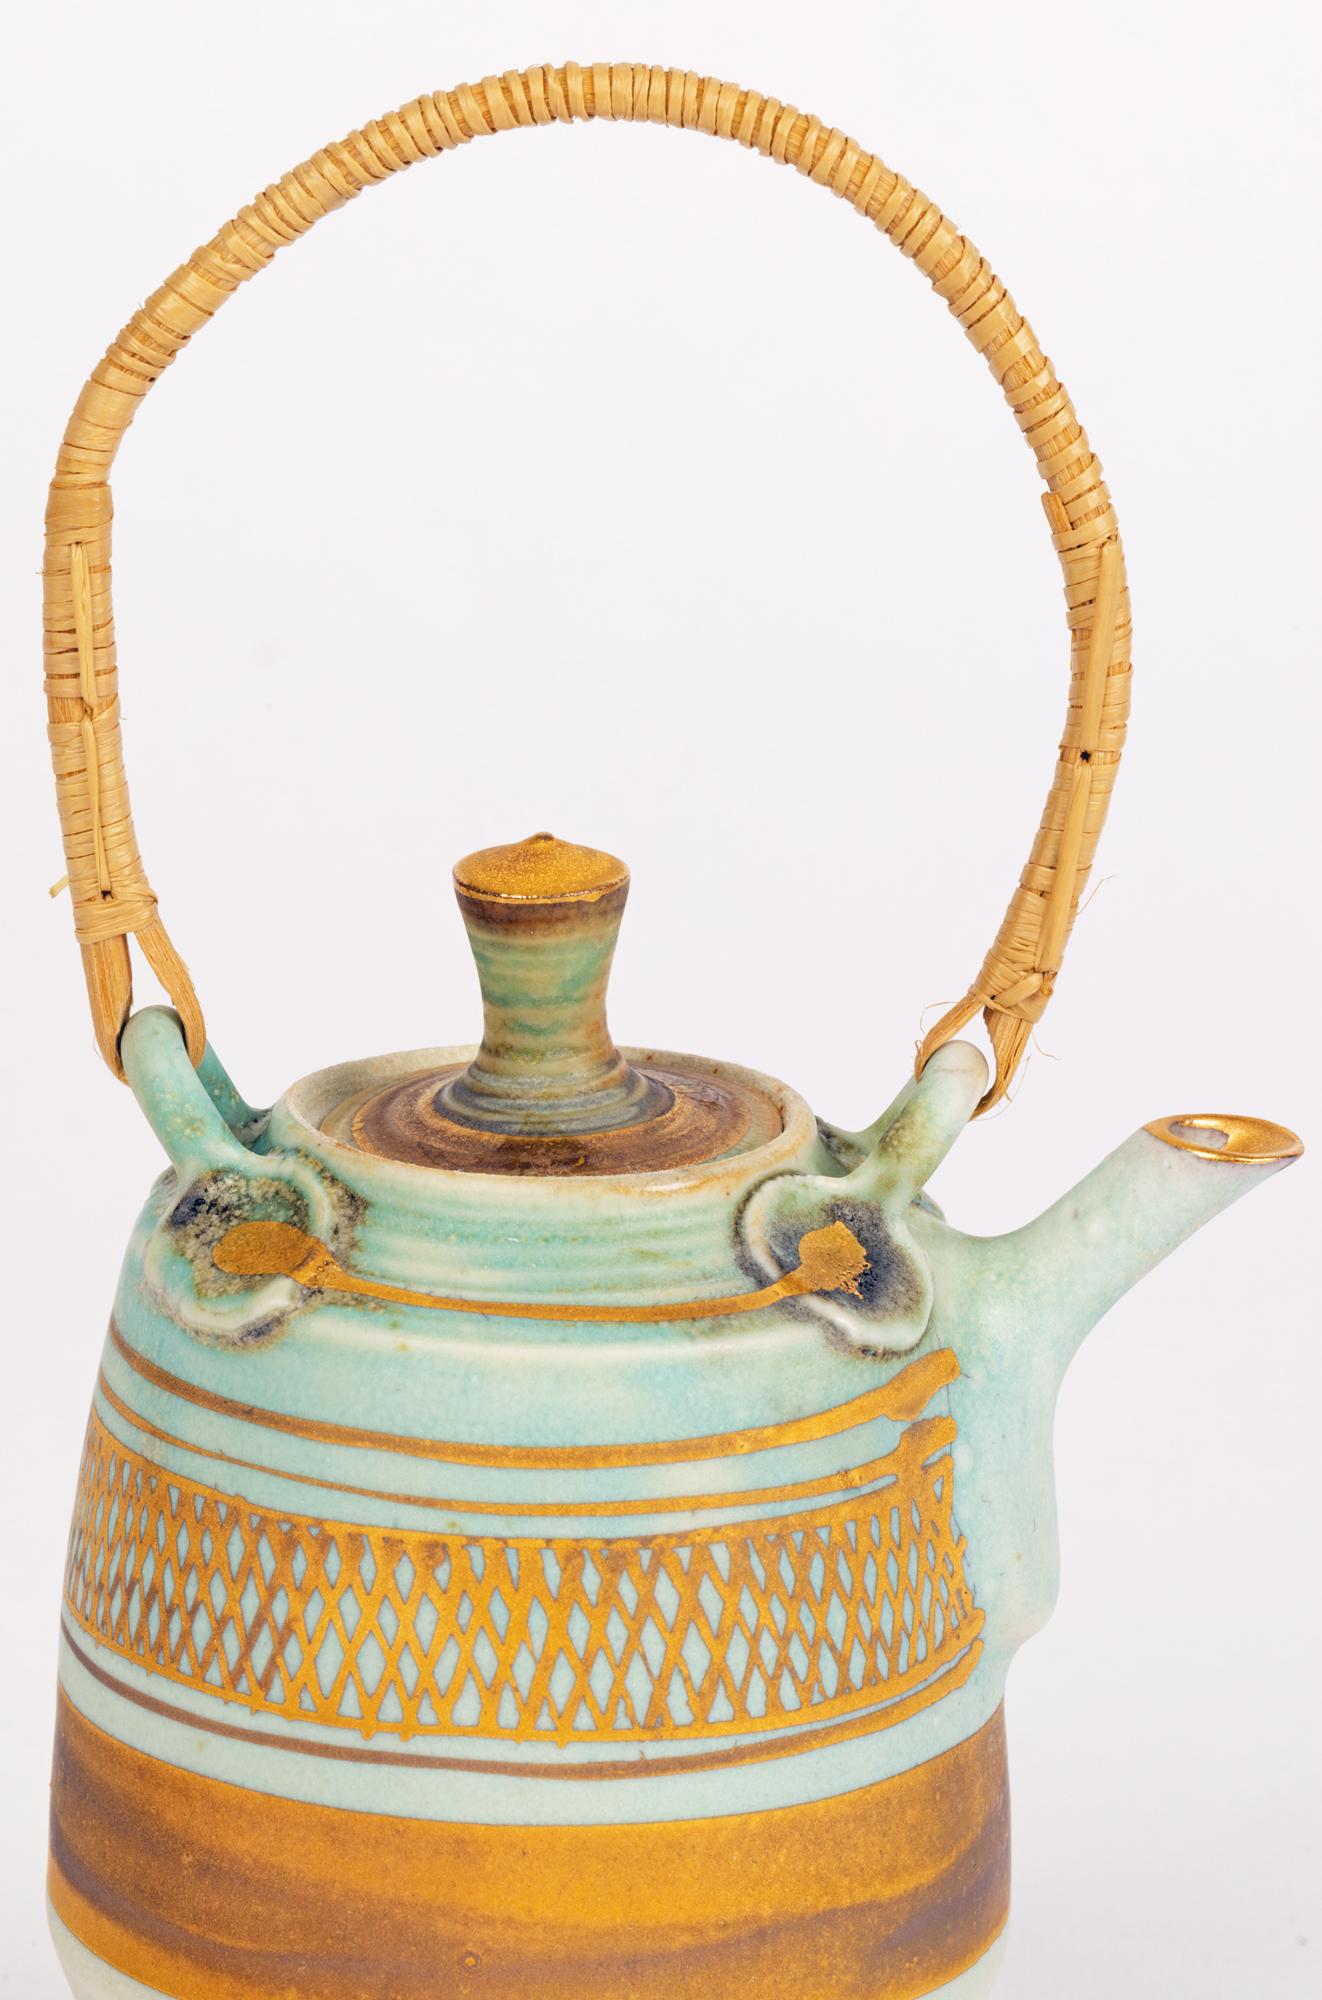 A stylish studio pottery porcelain miniature teapot with Islamic influence design in rich gilding on a green coloured ground by renowned potter Mary Rich (b.1940) and dating from the 20th Century. The small barrel shaped teapot has a short raised